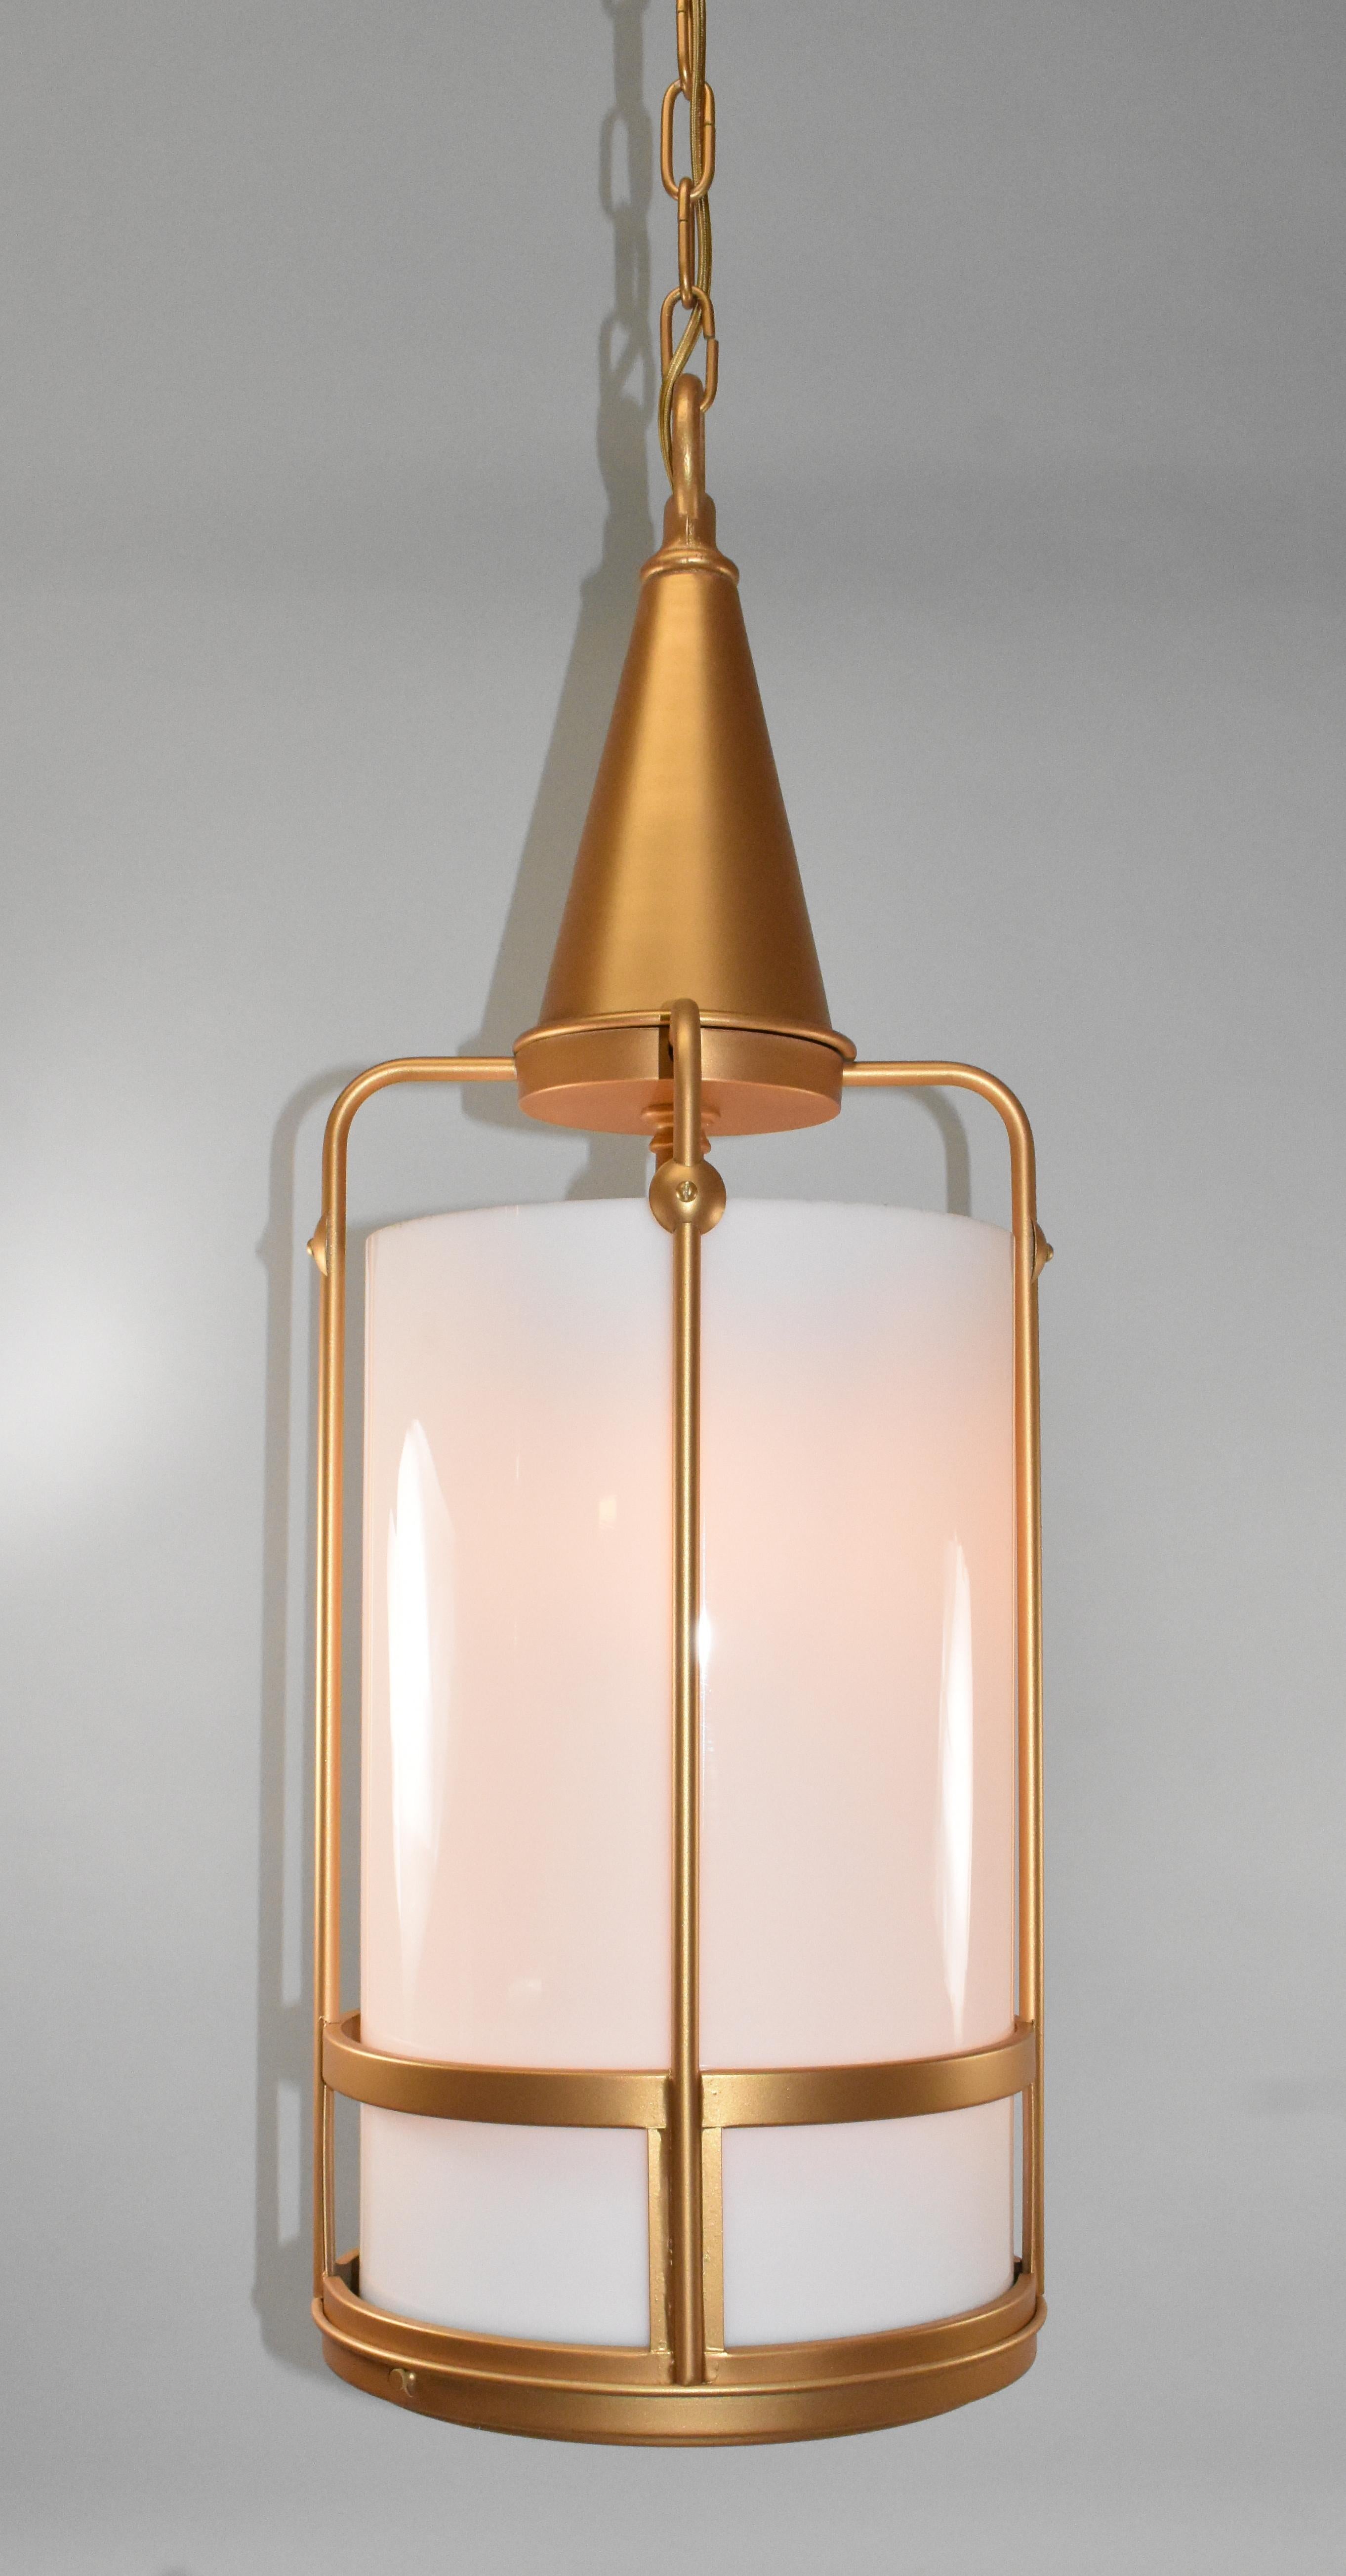 Vintage circa 1940s gold and opaque glass cylinder column chandelier pendant. Cage body with cone shape top that has decorative gold ball details. Four sockets in interior.